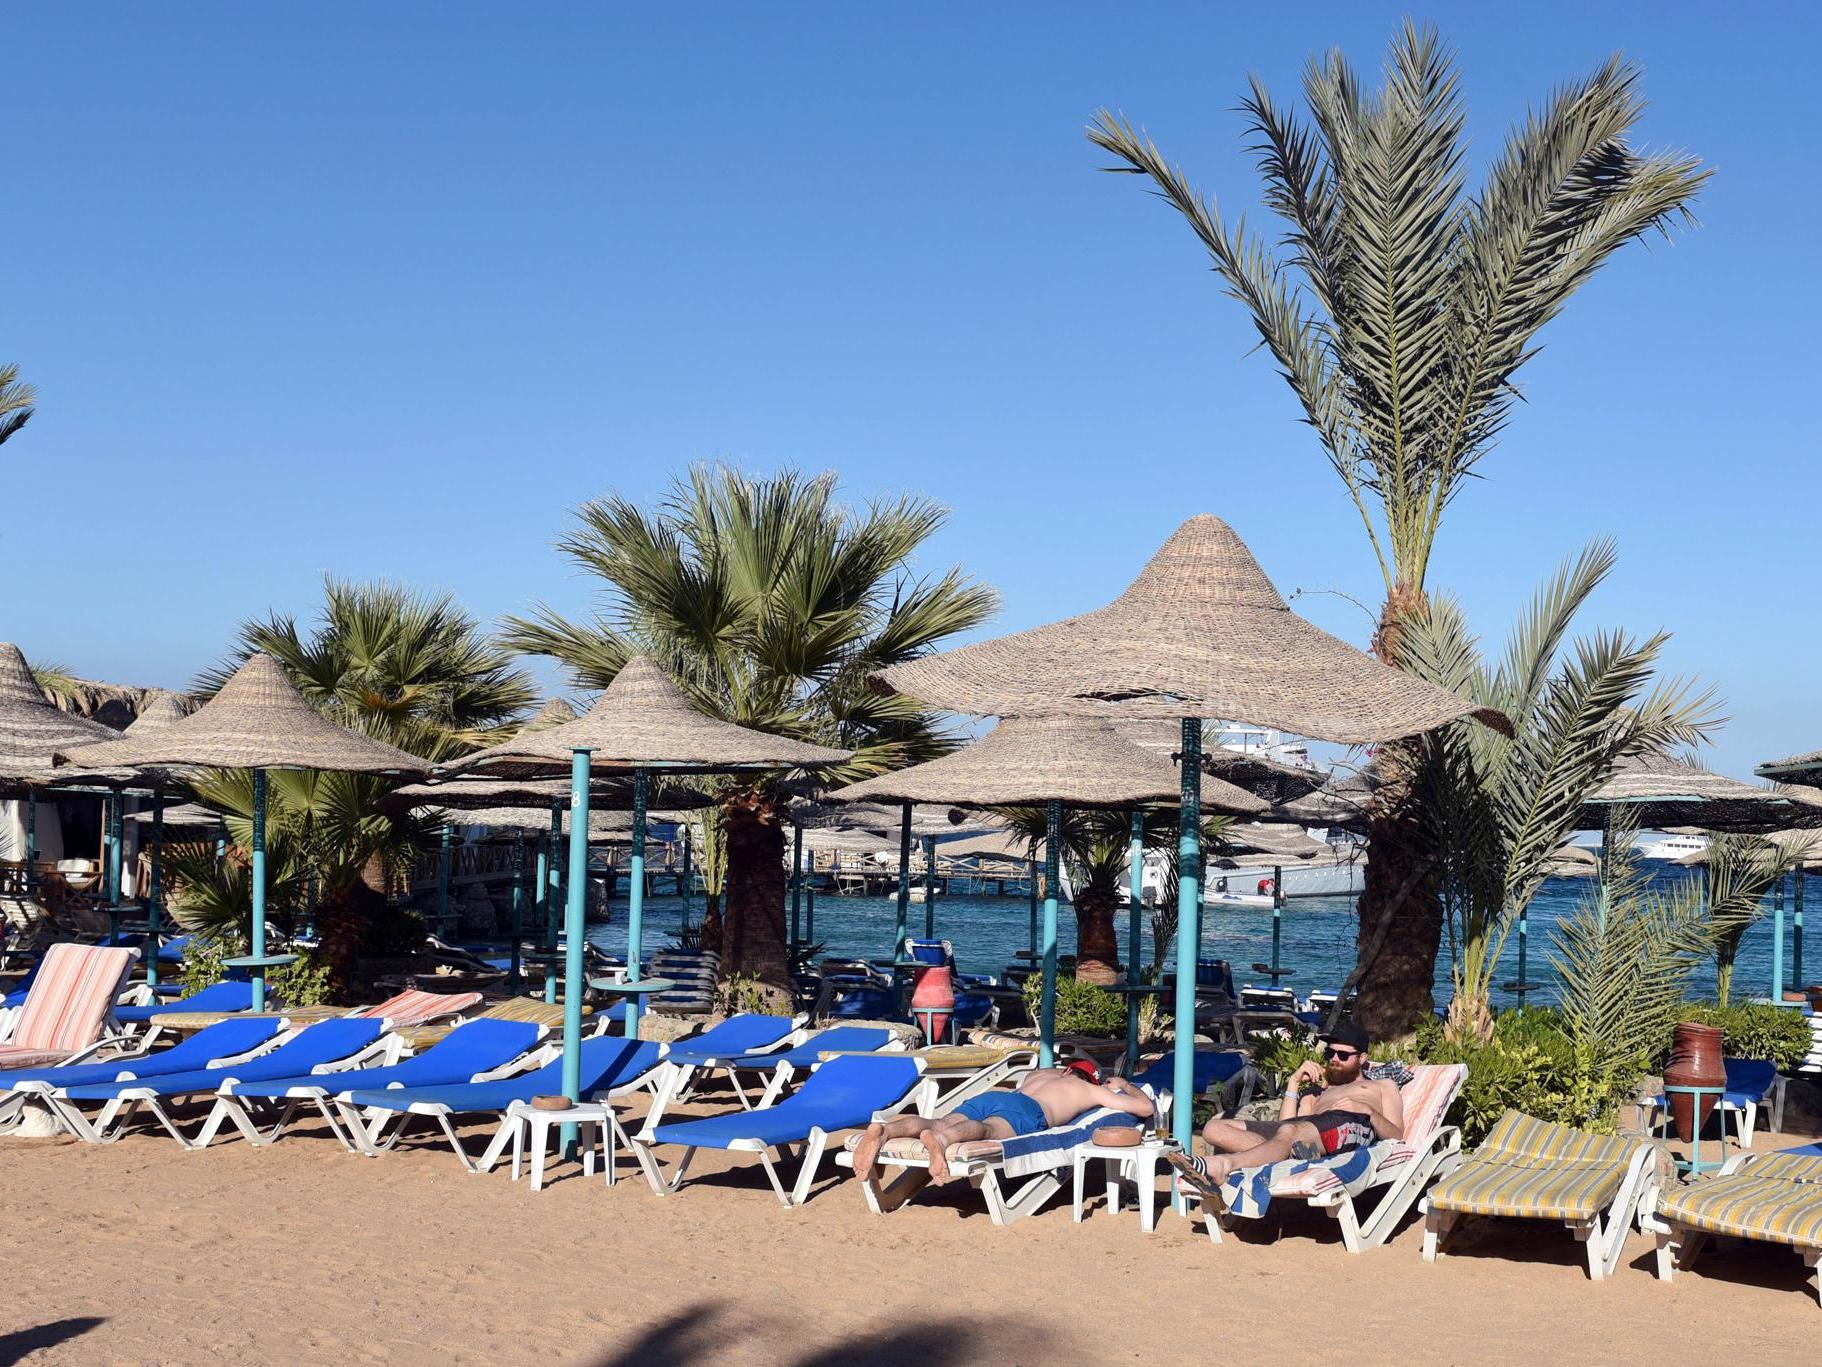 Although Sharm el-Sheikh is off the tourist map, you can still fly to Hurghada